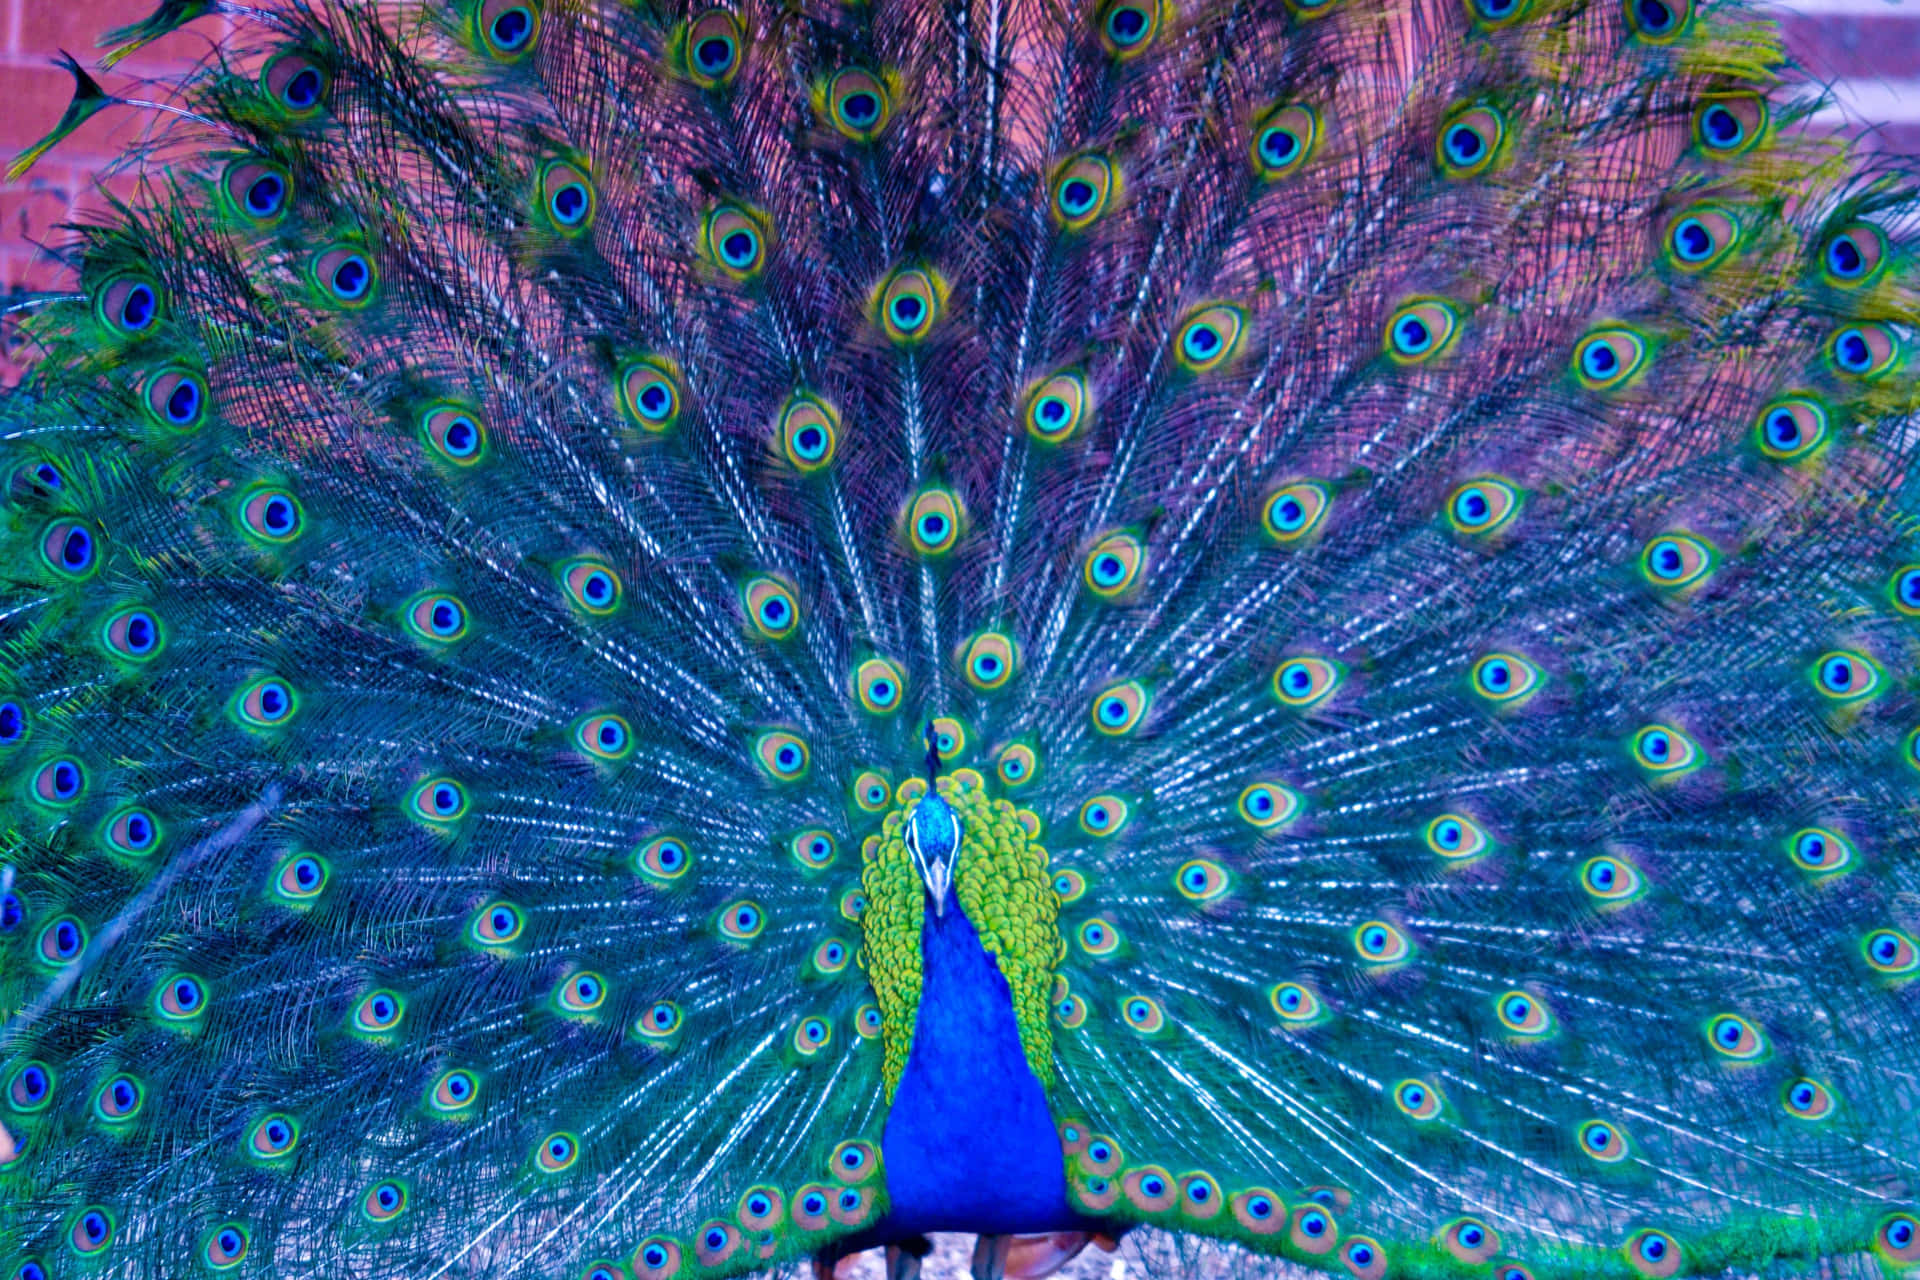 Image  A proud peacock displays its colorful feathers against an emerald green backdrop